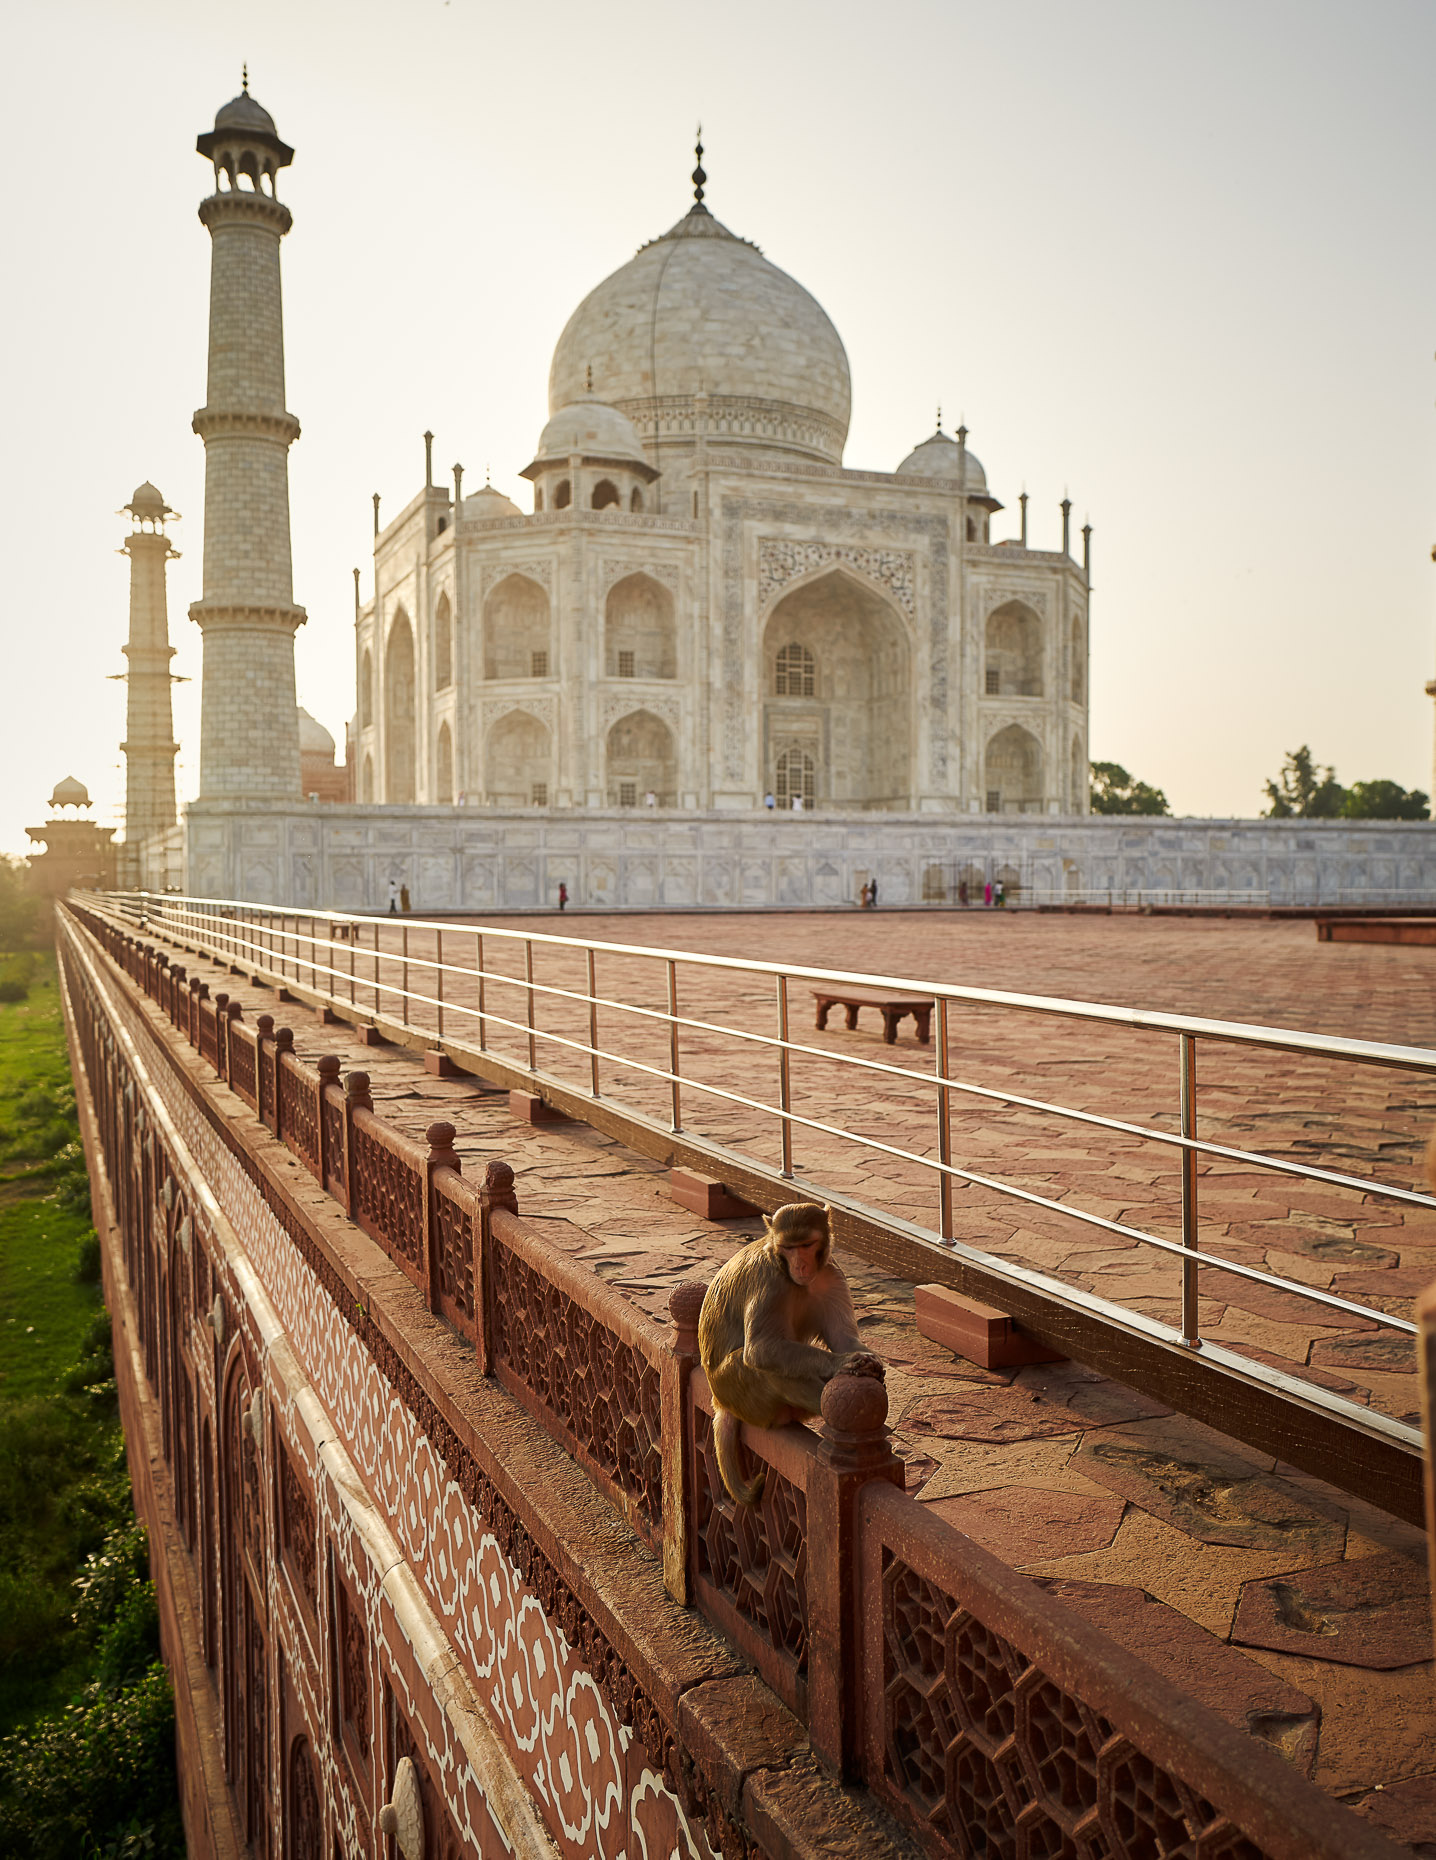 Personal_India_Agra_L10509751_1-28